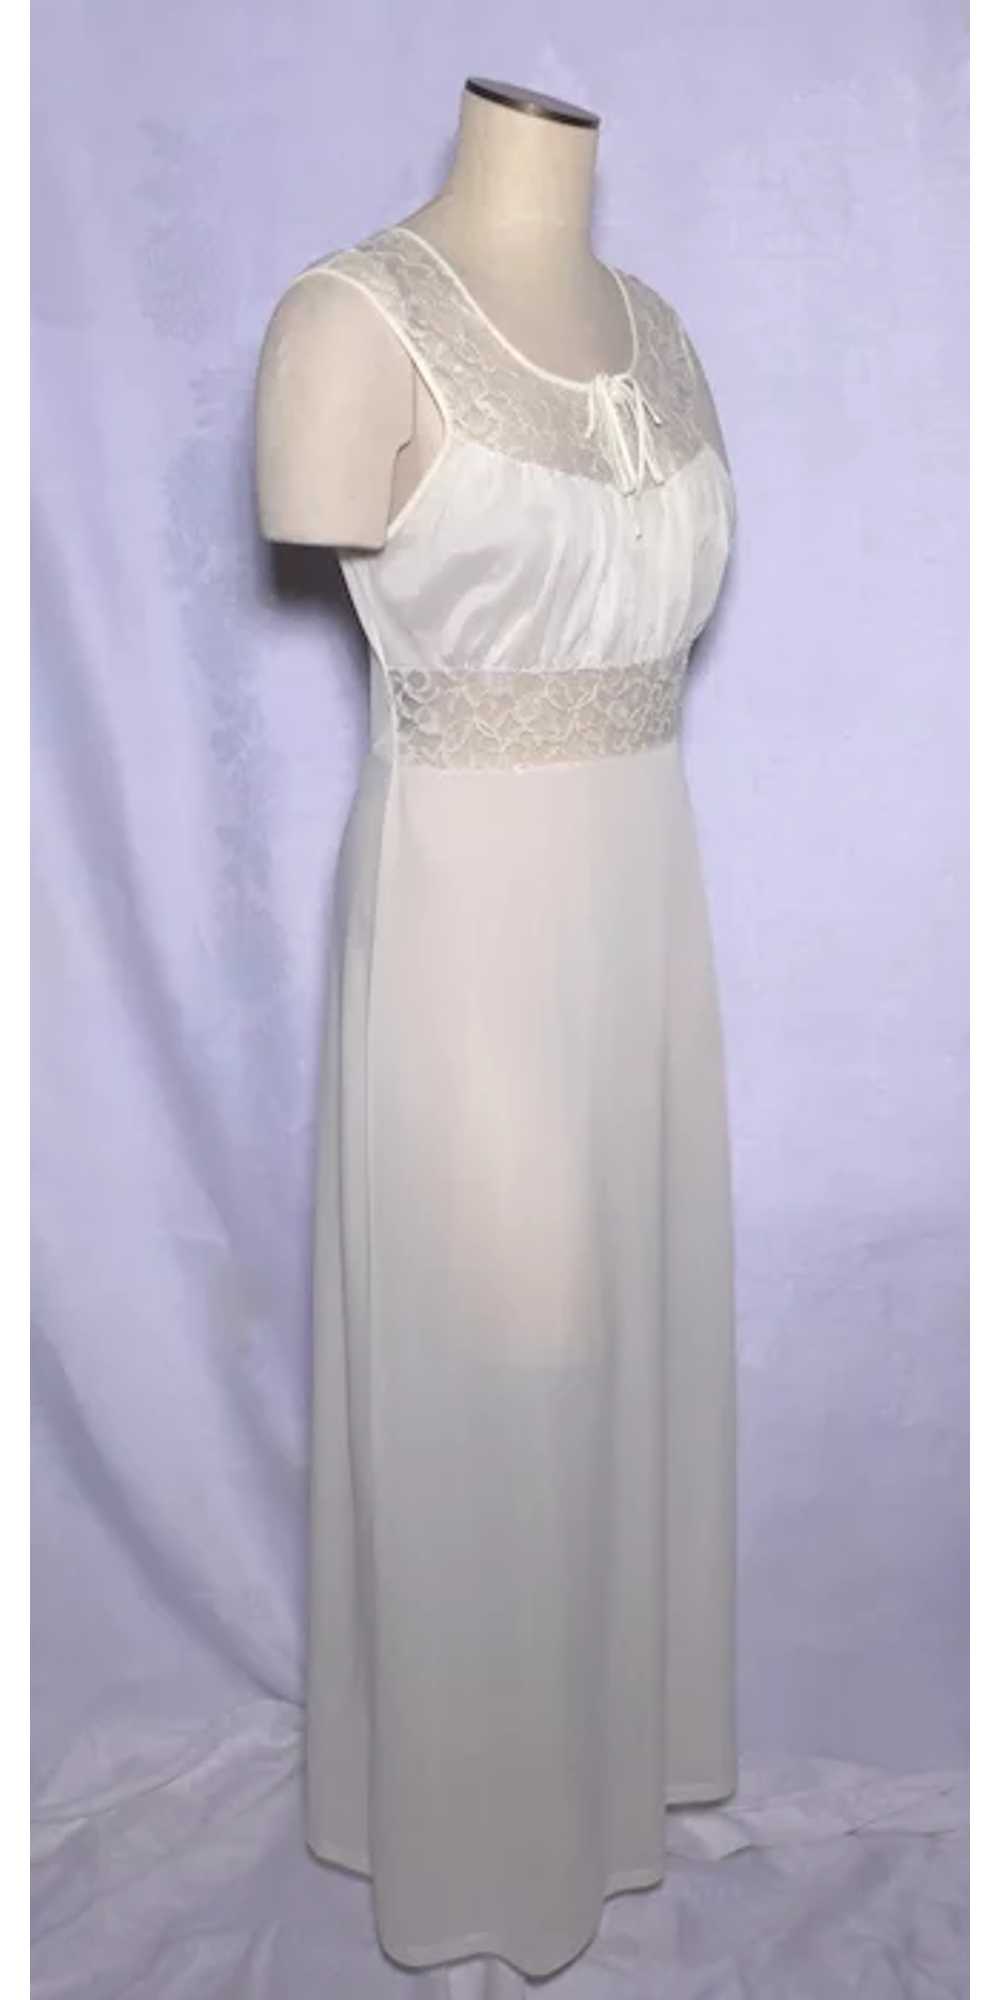 Vintage 1950s Radcliffe Nightgown Full Length Whi… - image 9